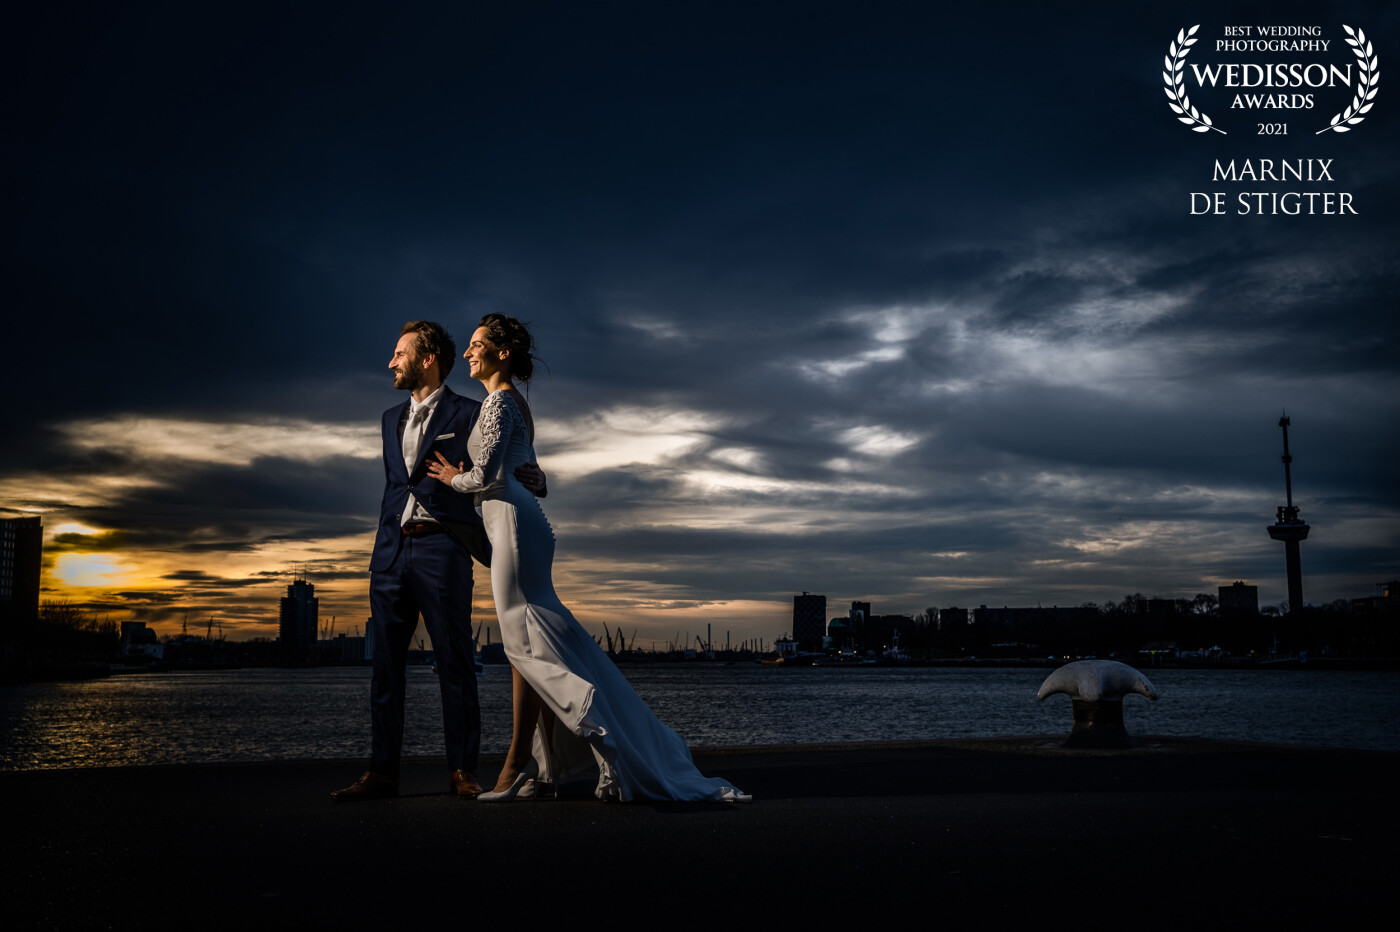 After a beautiful day, this was the perfect place for an ending shoot of the day in their beloved city of Rotterdam. Adding a flash added the extra pop in the image:)